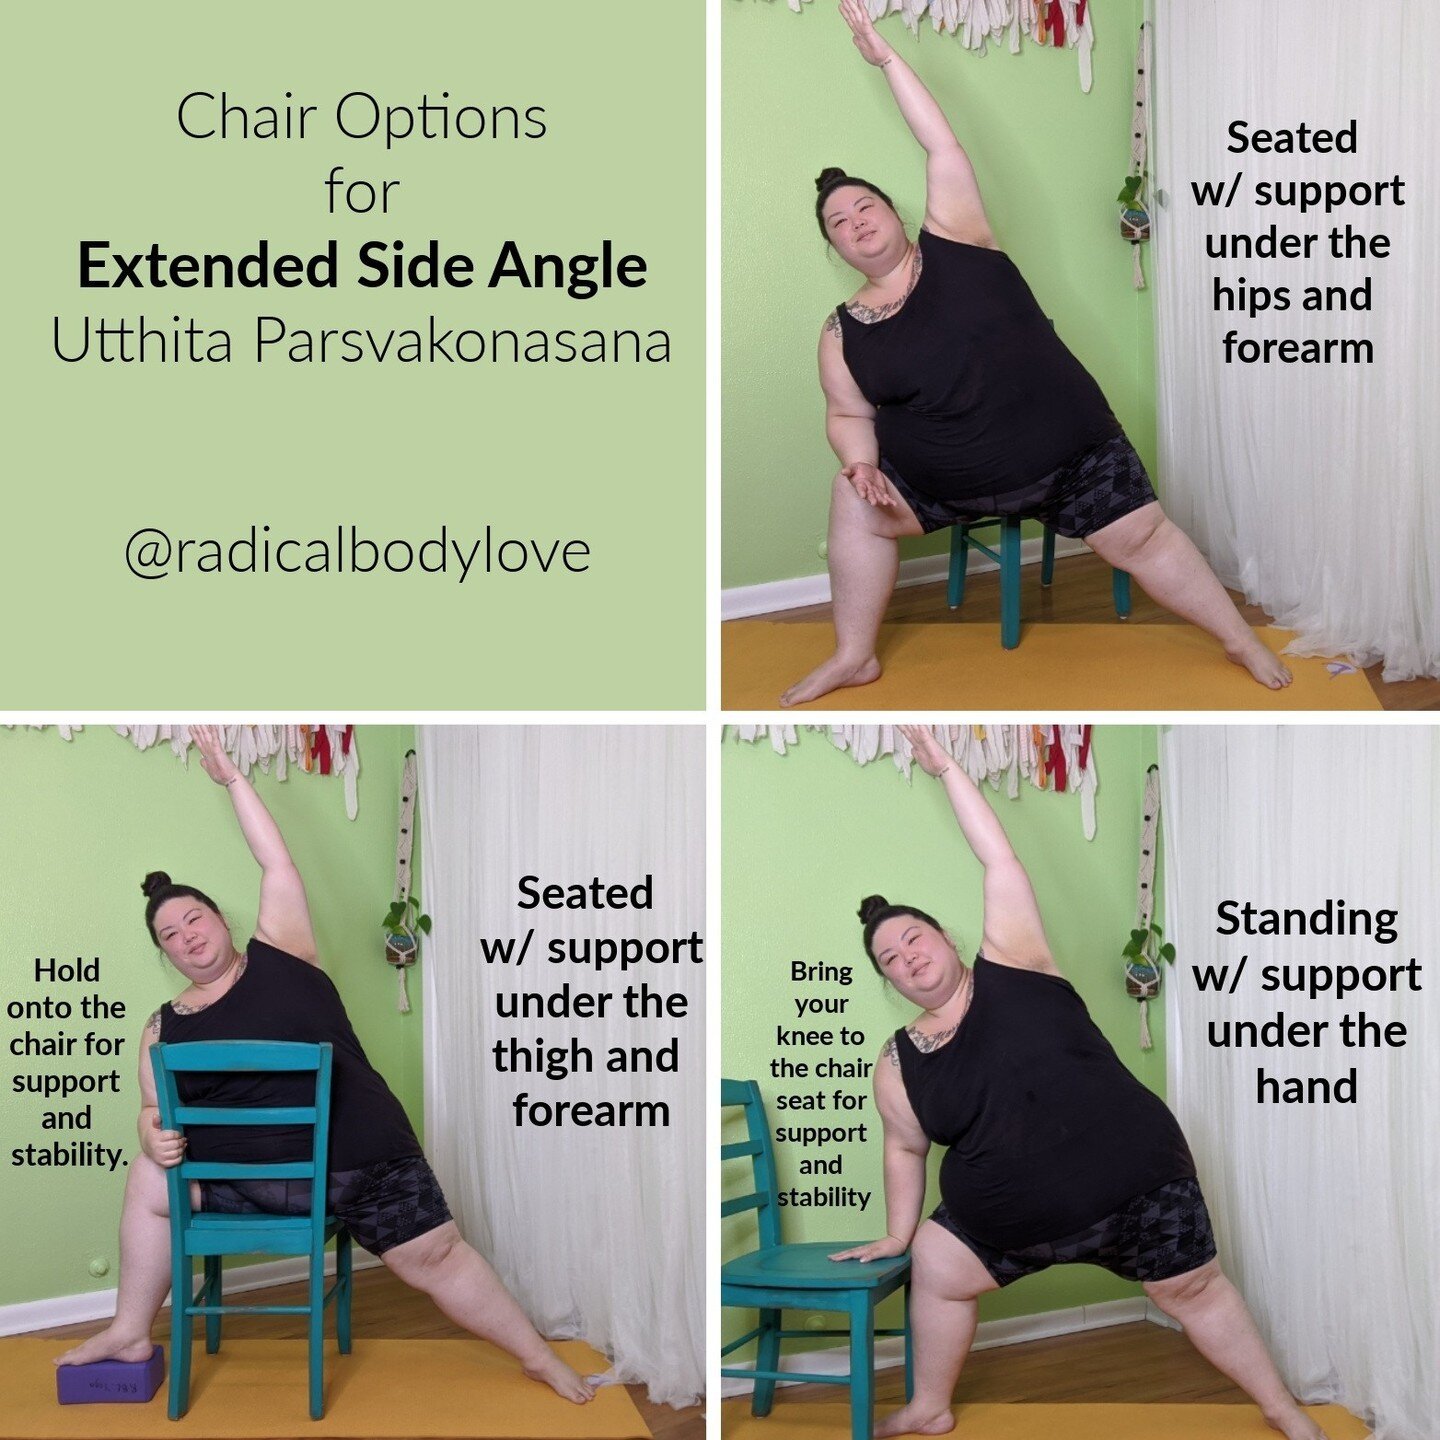 Let's explore Extended Side Angle options together! ⁠
⁠
It's often added into the practice of Warrior II, but has a lot to give on it's own. There's opportunities for supported stretching, strengthening of the whole body, and ways to add dynamic move